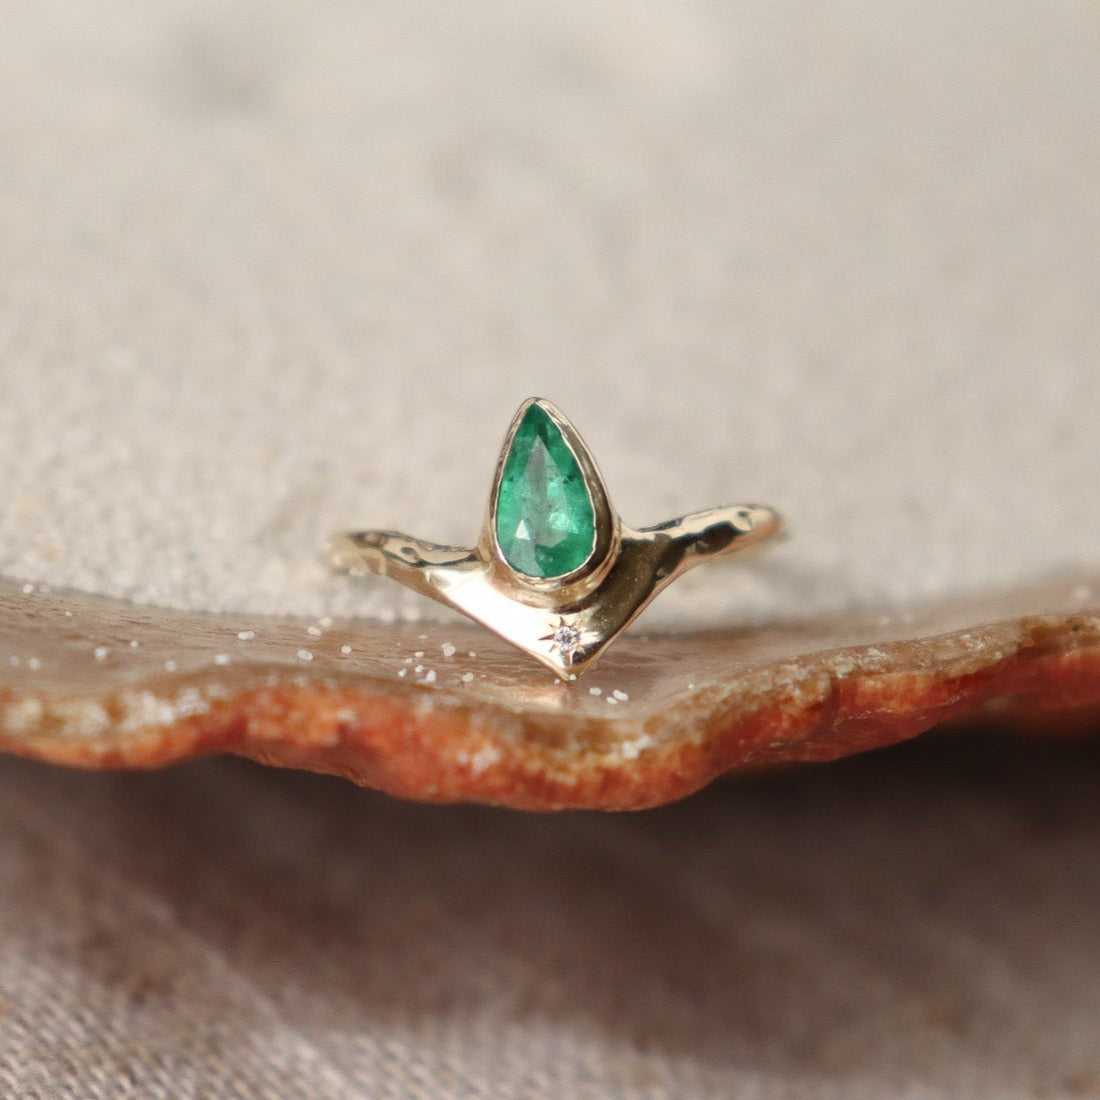 Pear-shaped emerald bezel-set with a brilliant diamond star at its base, creating a striking and celestial-inspired jewelry piece.